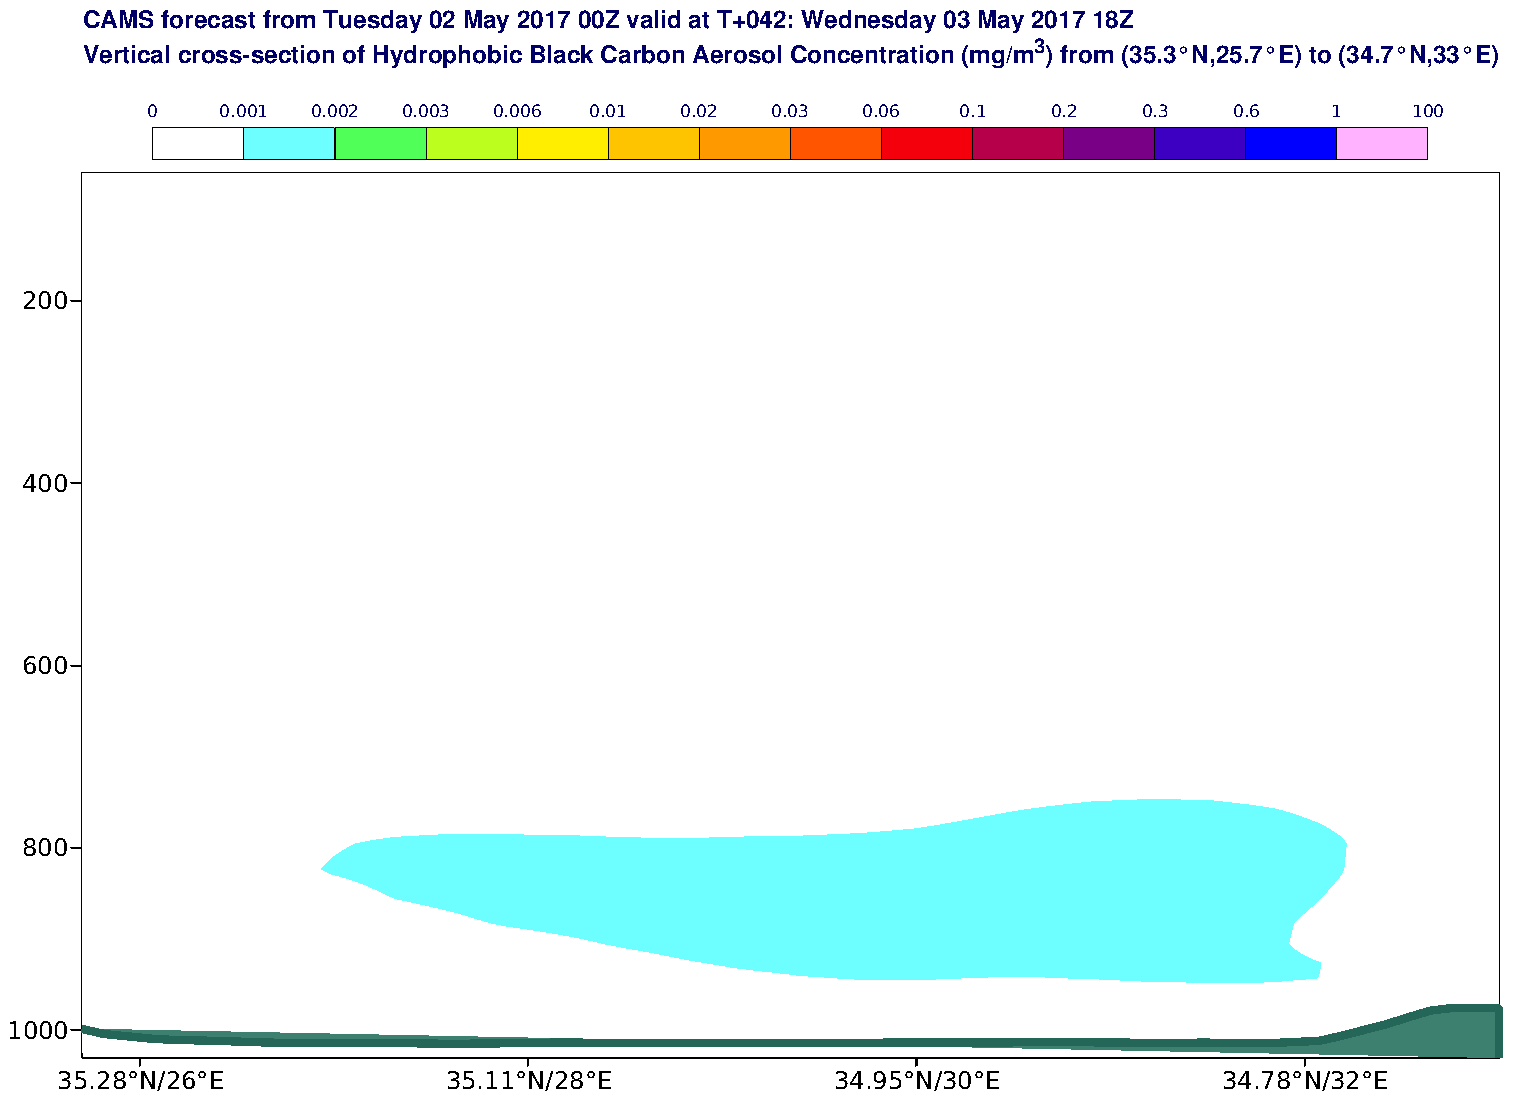 Vertical cross-section of Hydrophobic Black Carbon Aerosol Concentration (mg/m3) valid at T42 - 2017-05-03 18:00